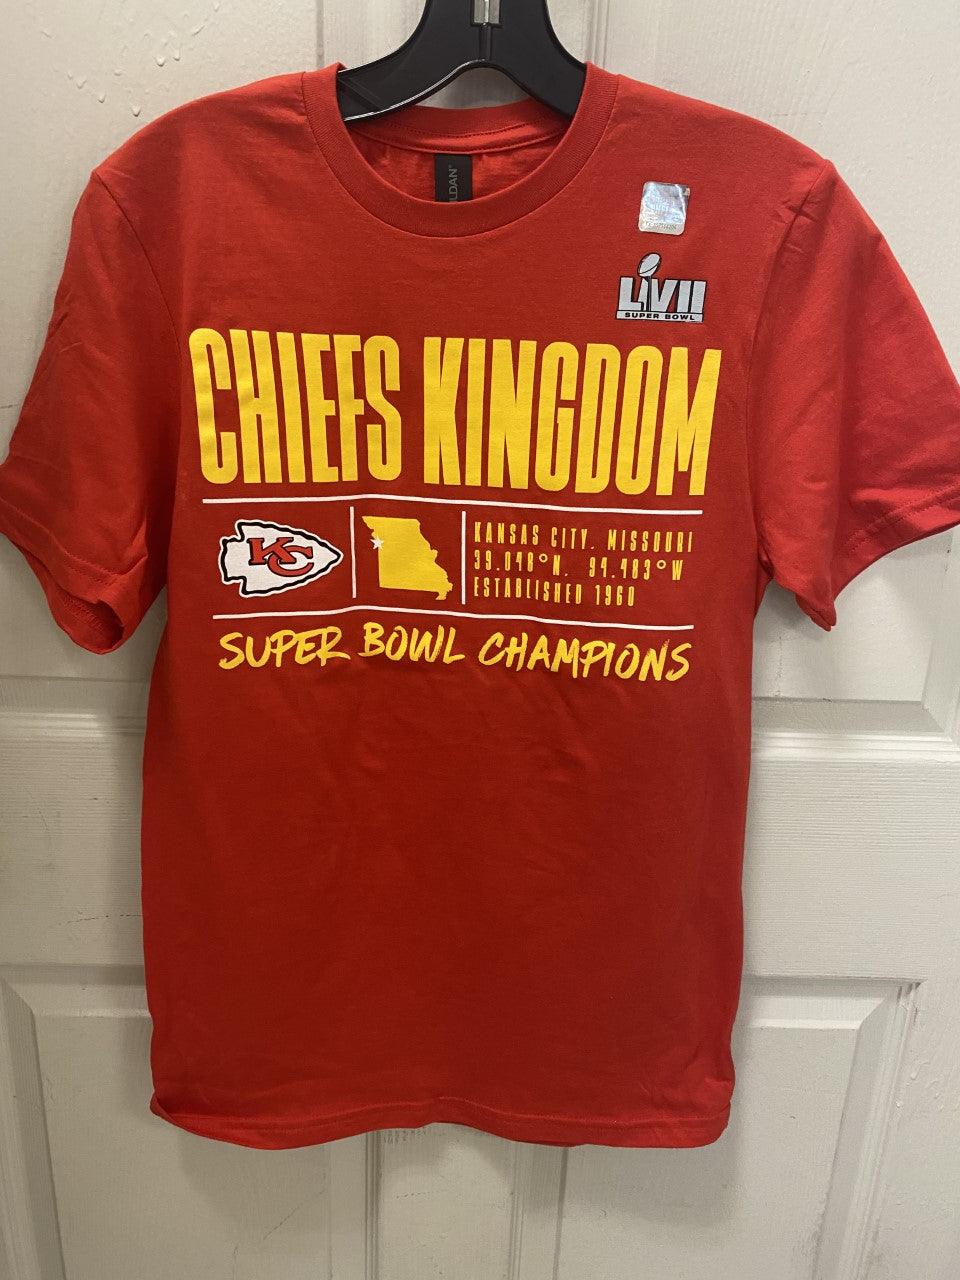 Kansas City Chiefs MO MO & Authentics, Champions T-Shirt Gifts Sports Red by | Apparel Fanatic Bowl Super LVII